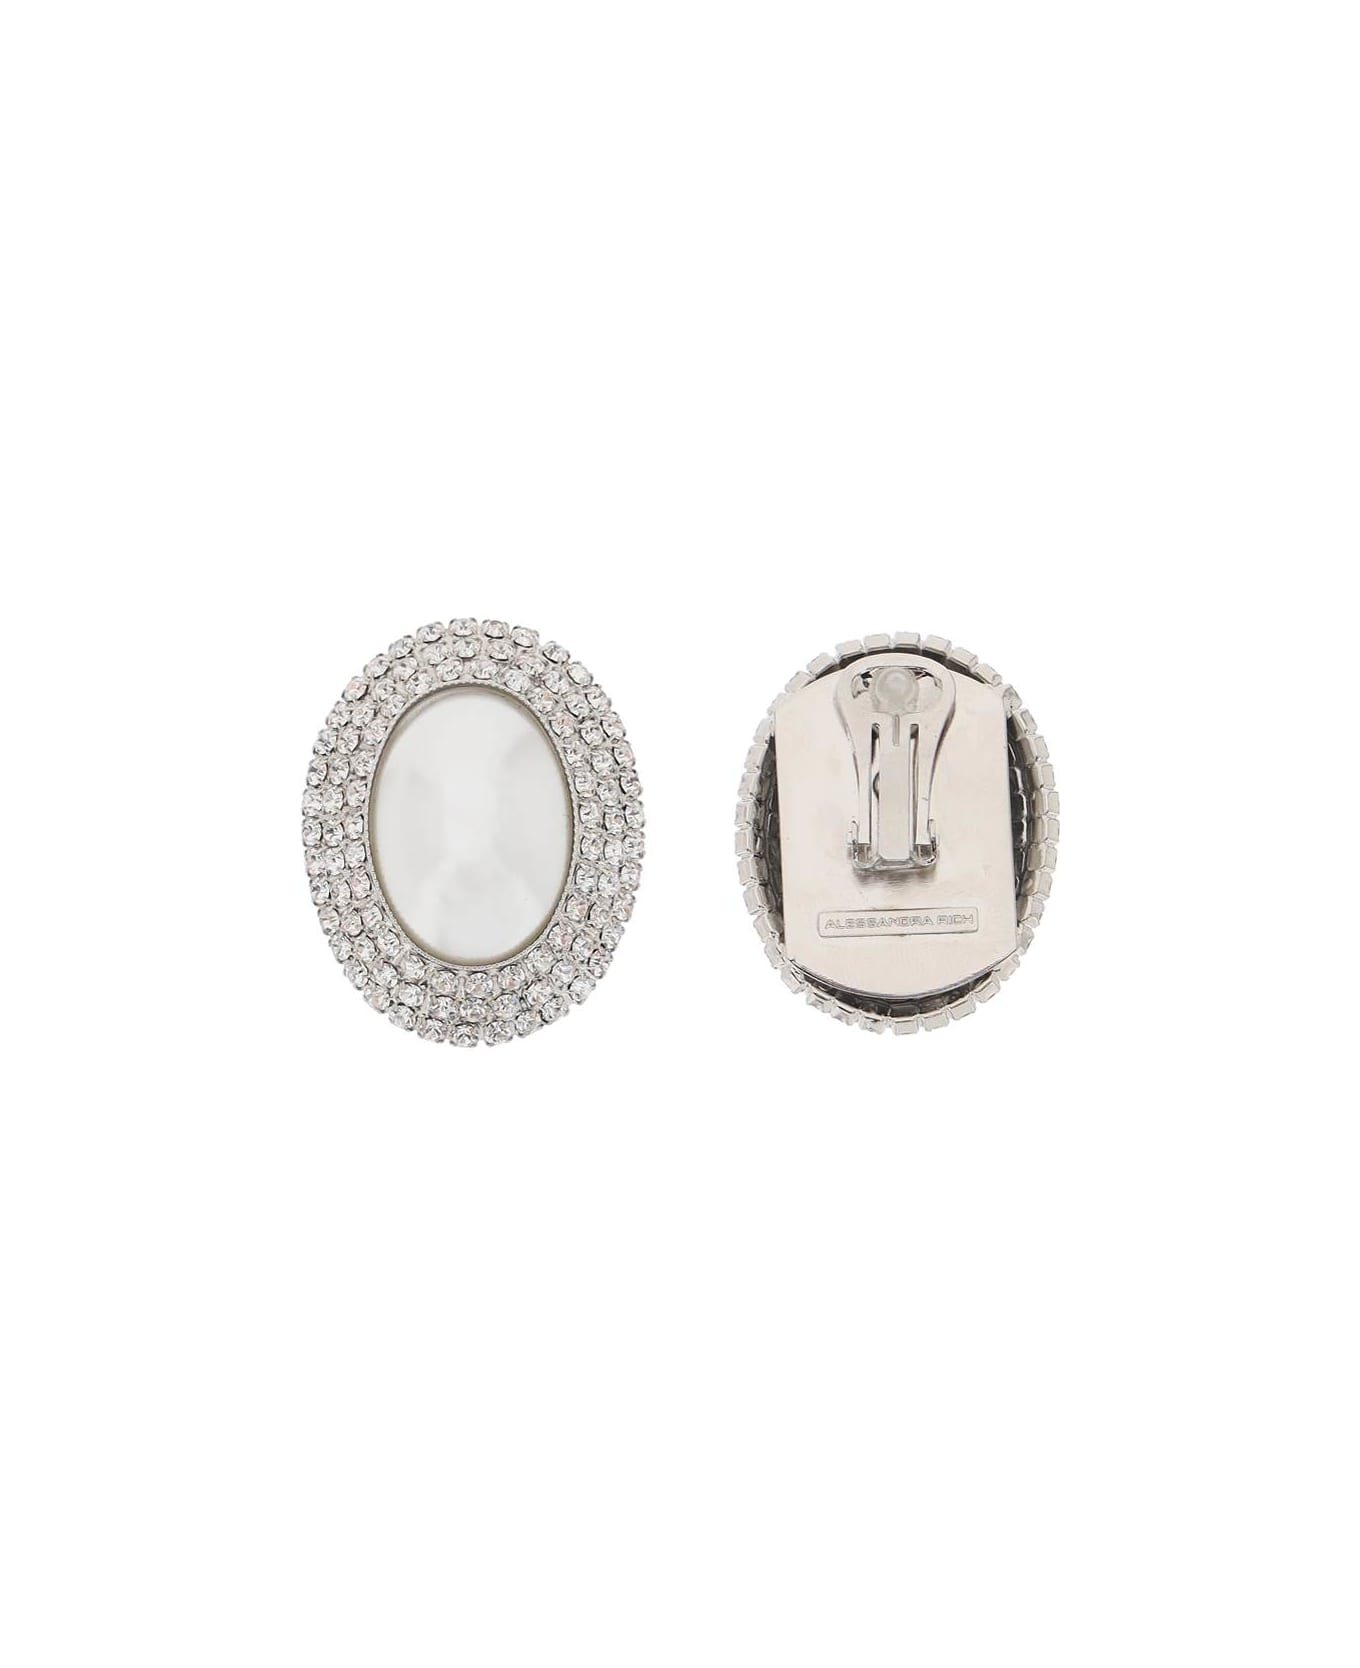 Alessandra Rich Oval Earrings With Pearl And Crystals - CRY SILVER (Silver)